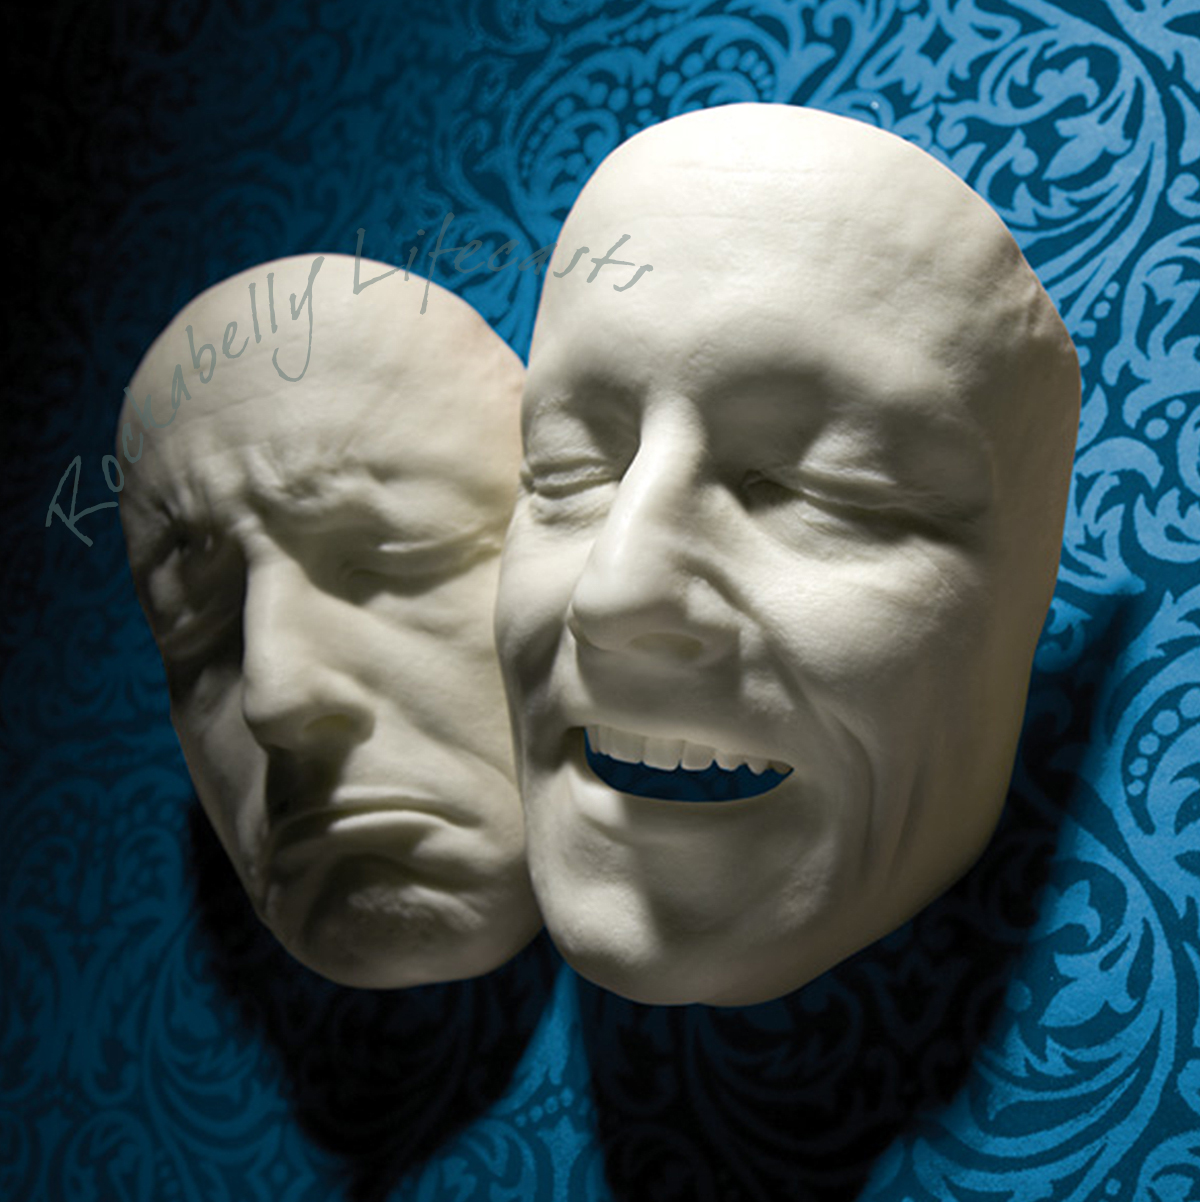 Faces and head casts